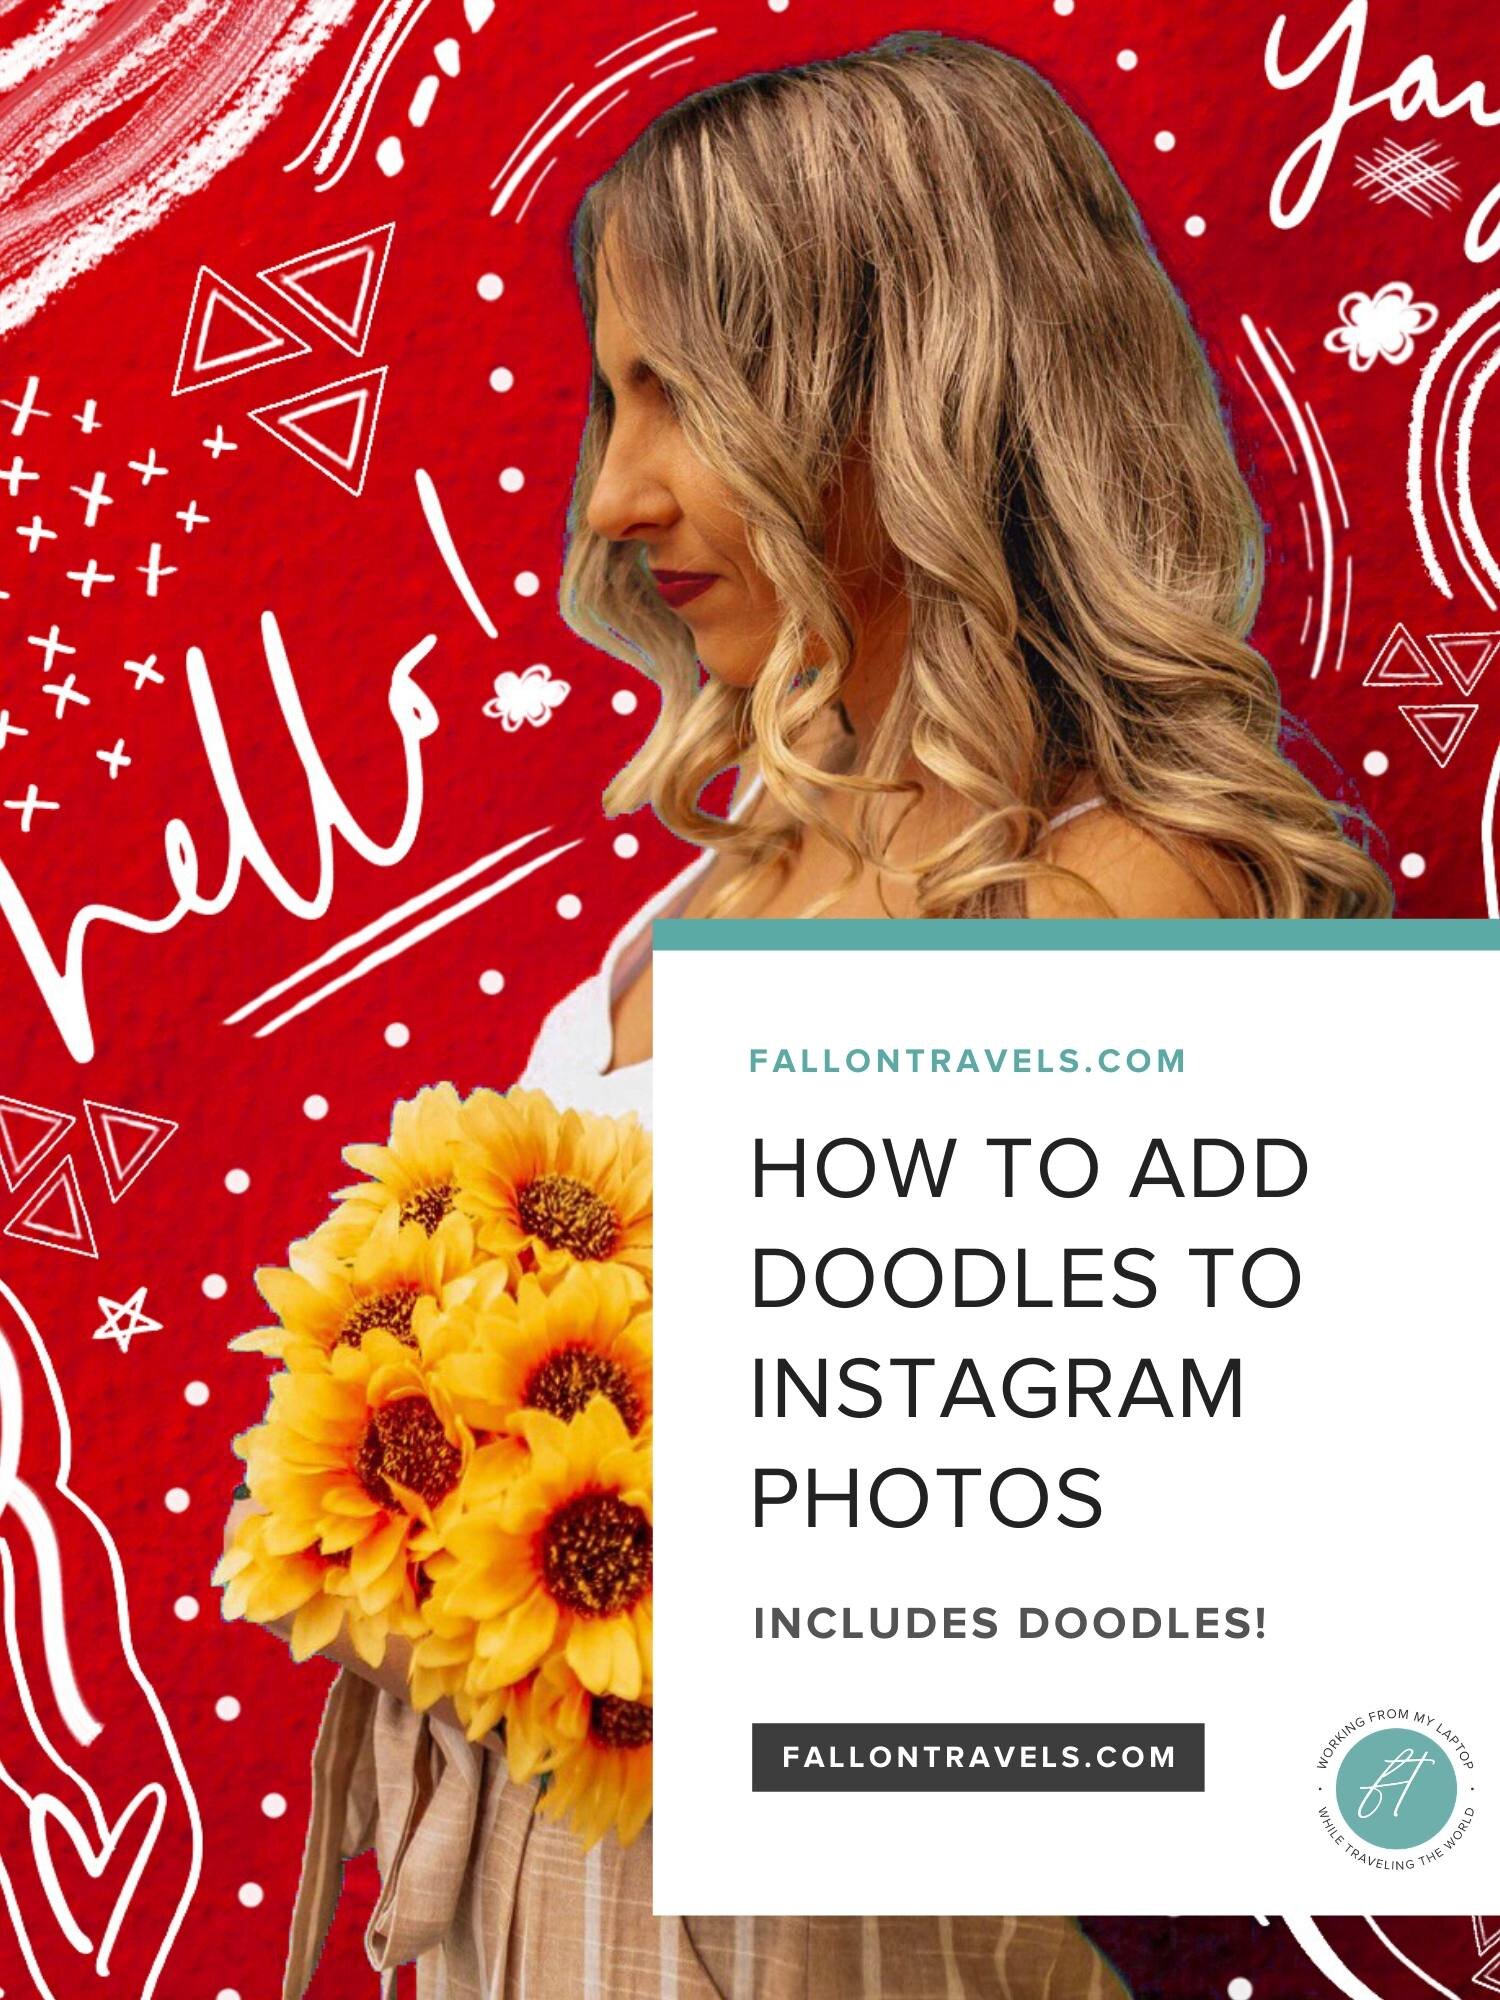 add fun doodles and outlines to instagram photos